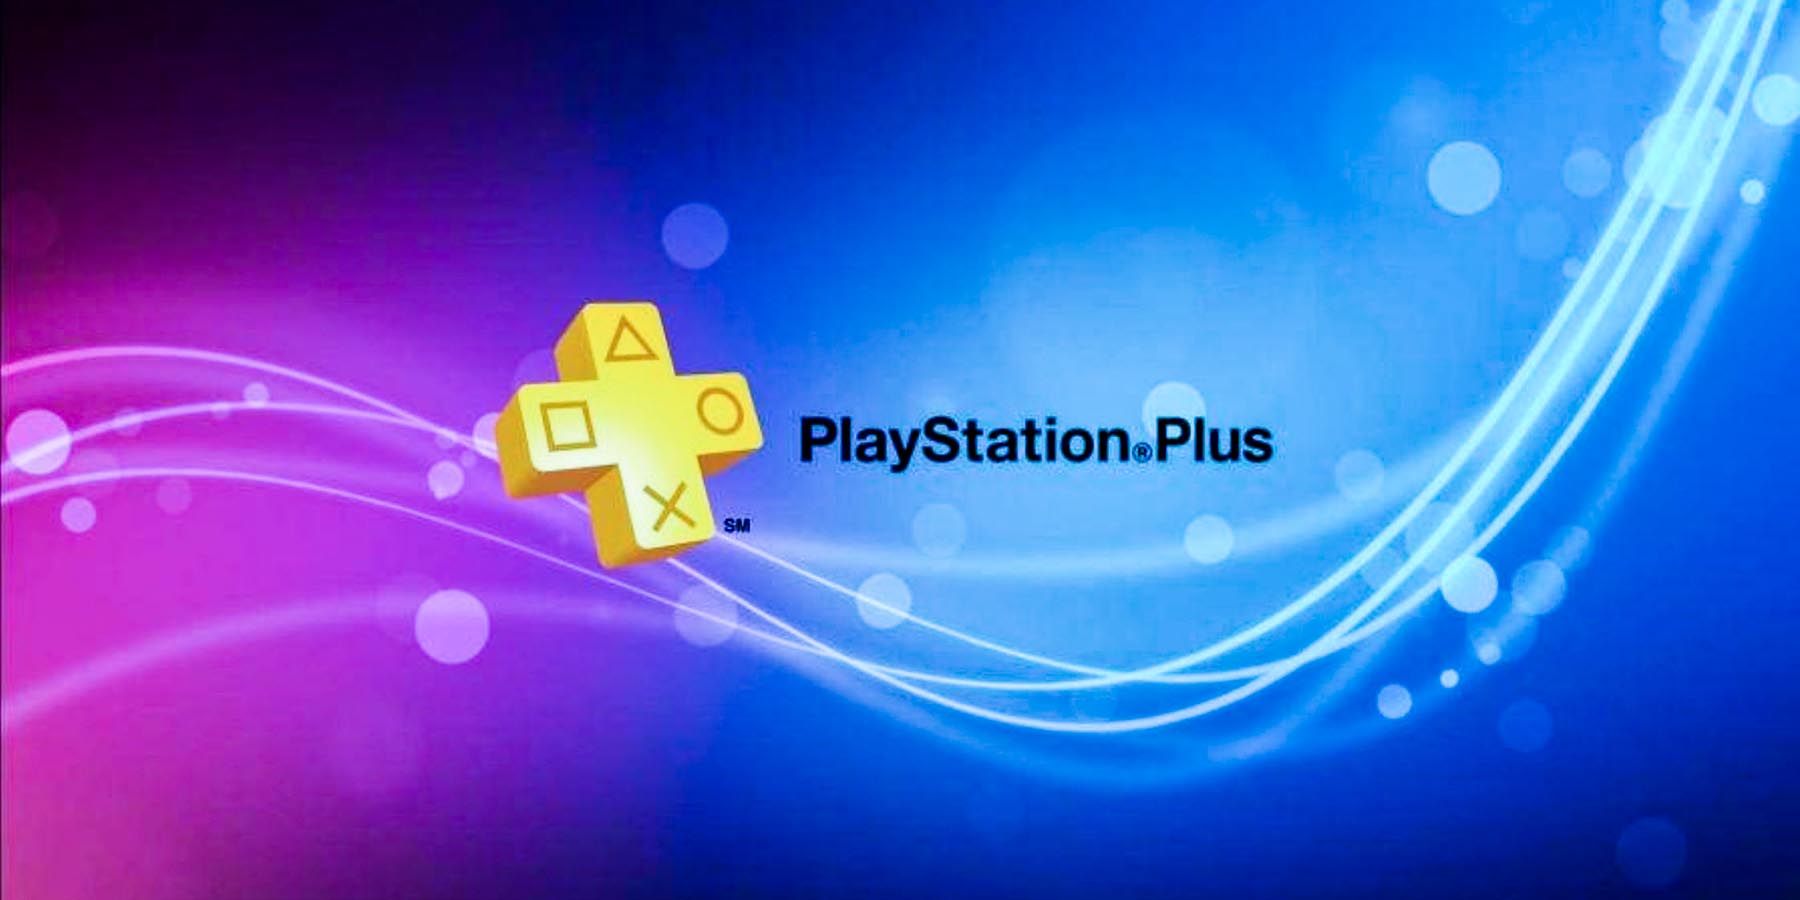 PlayStation Plus Monthly Games for June: God of War, Naruto to